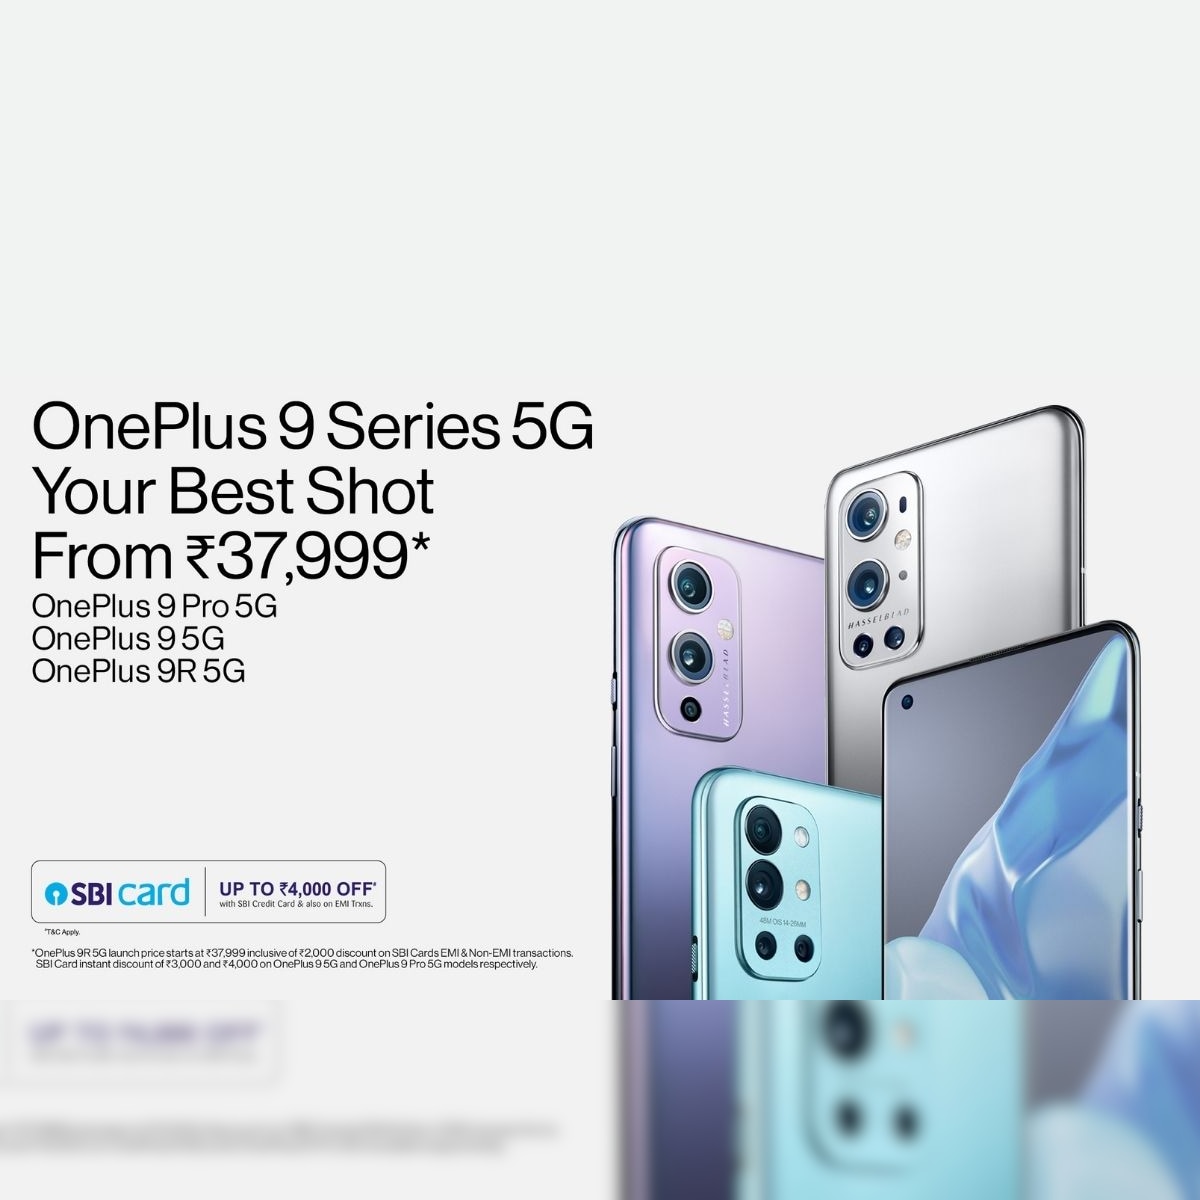 Oneplus 9 Oneplus 9 Pro Oneplus 9r Will Go On Sale Via Amazon Oneplus Store All Deals And Prices